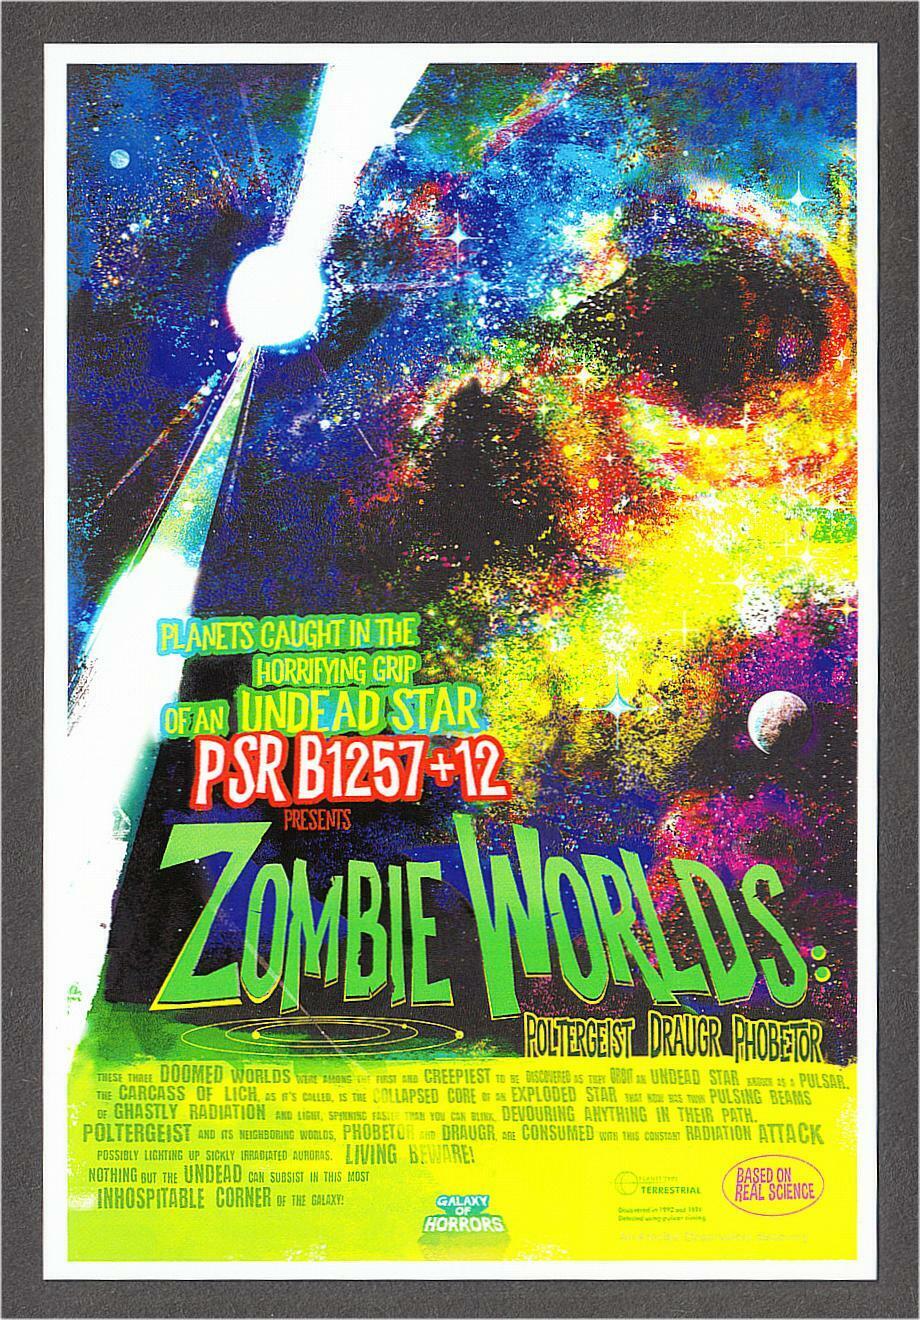 PSR B1257+12 Pulsar Star and Exoplanets Zombie Worlds Outer Space Postcard